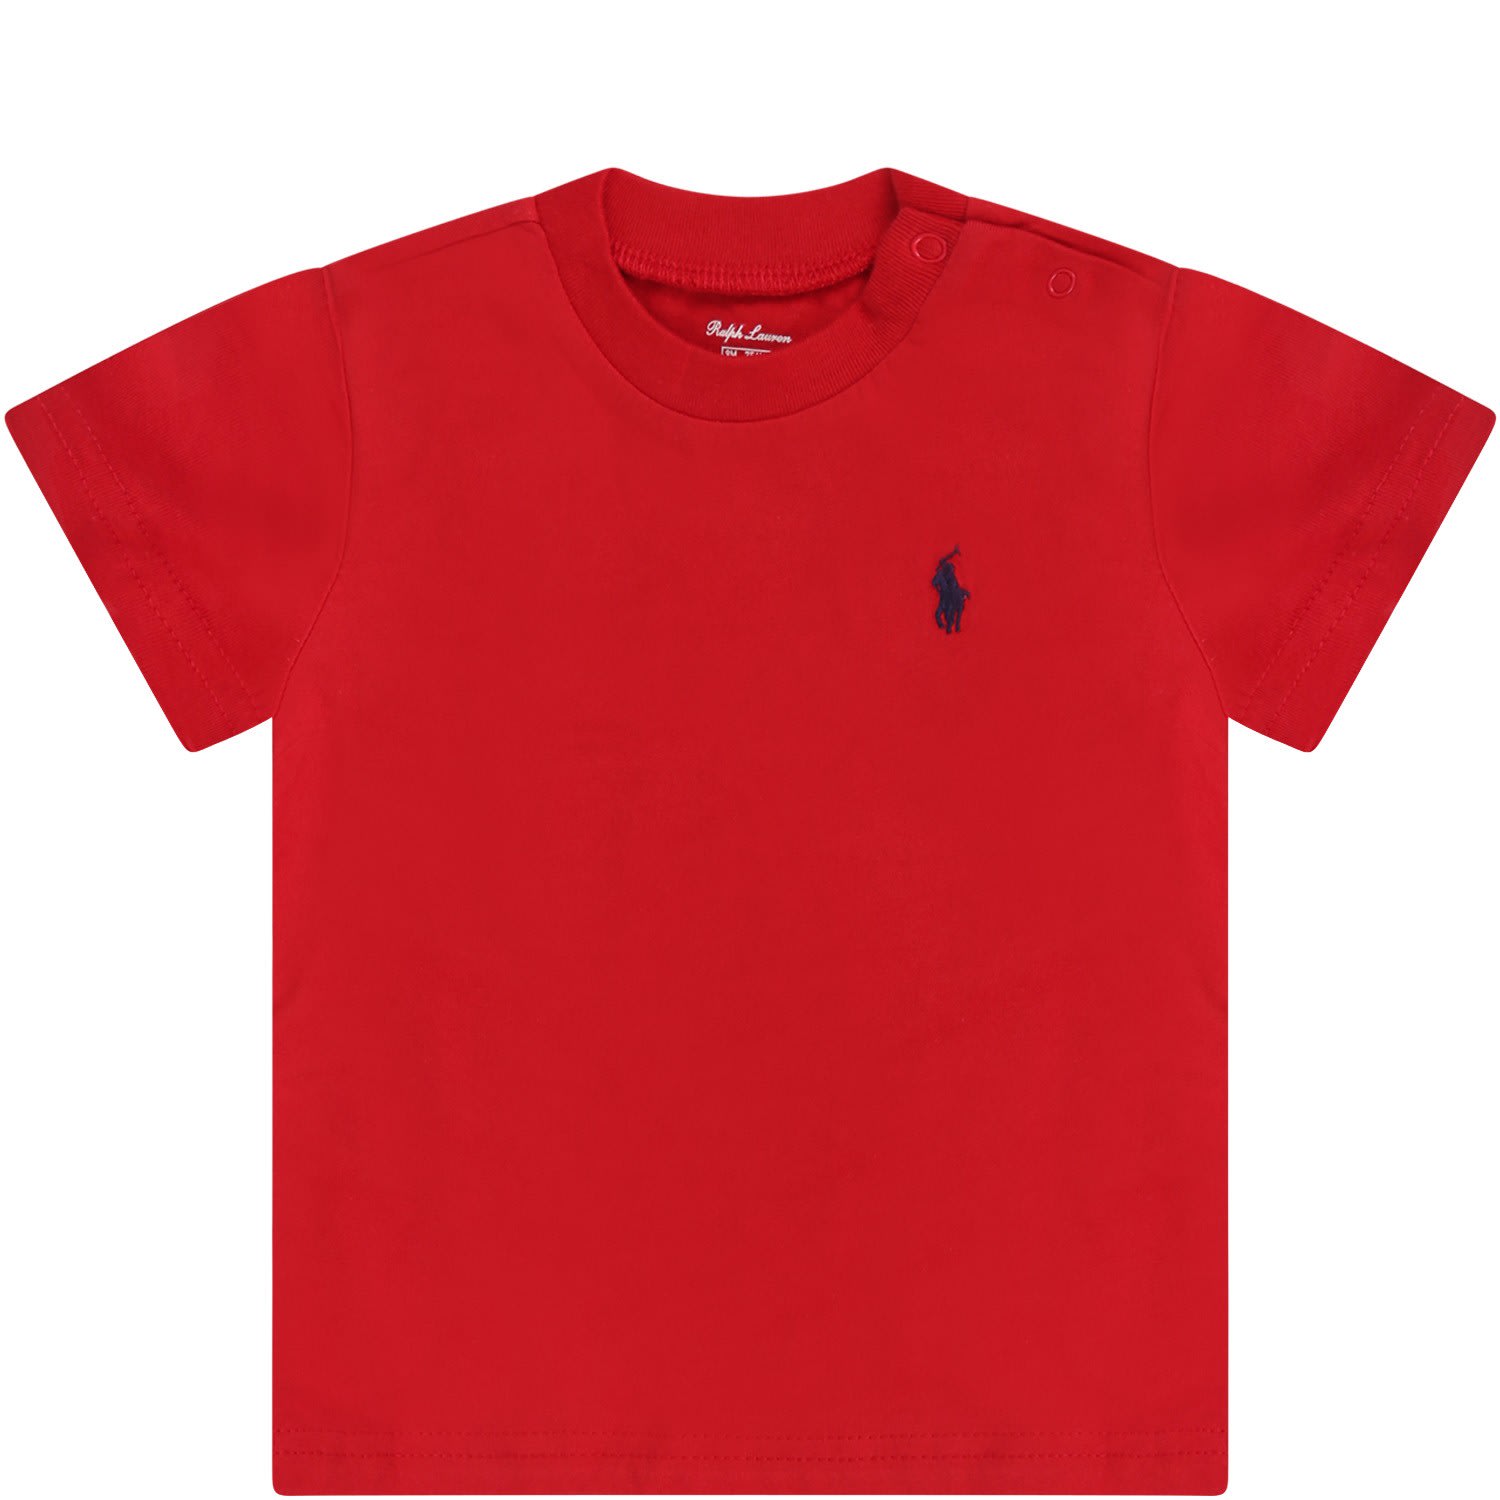 RALPH LAUREN RED T-SHIRT FOR BABY BOY WITH BLUE ICONIC PONY LOGO,11223813